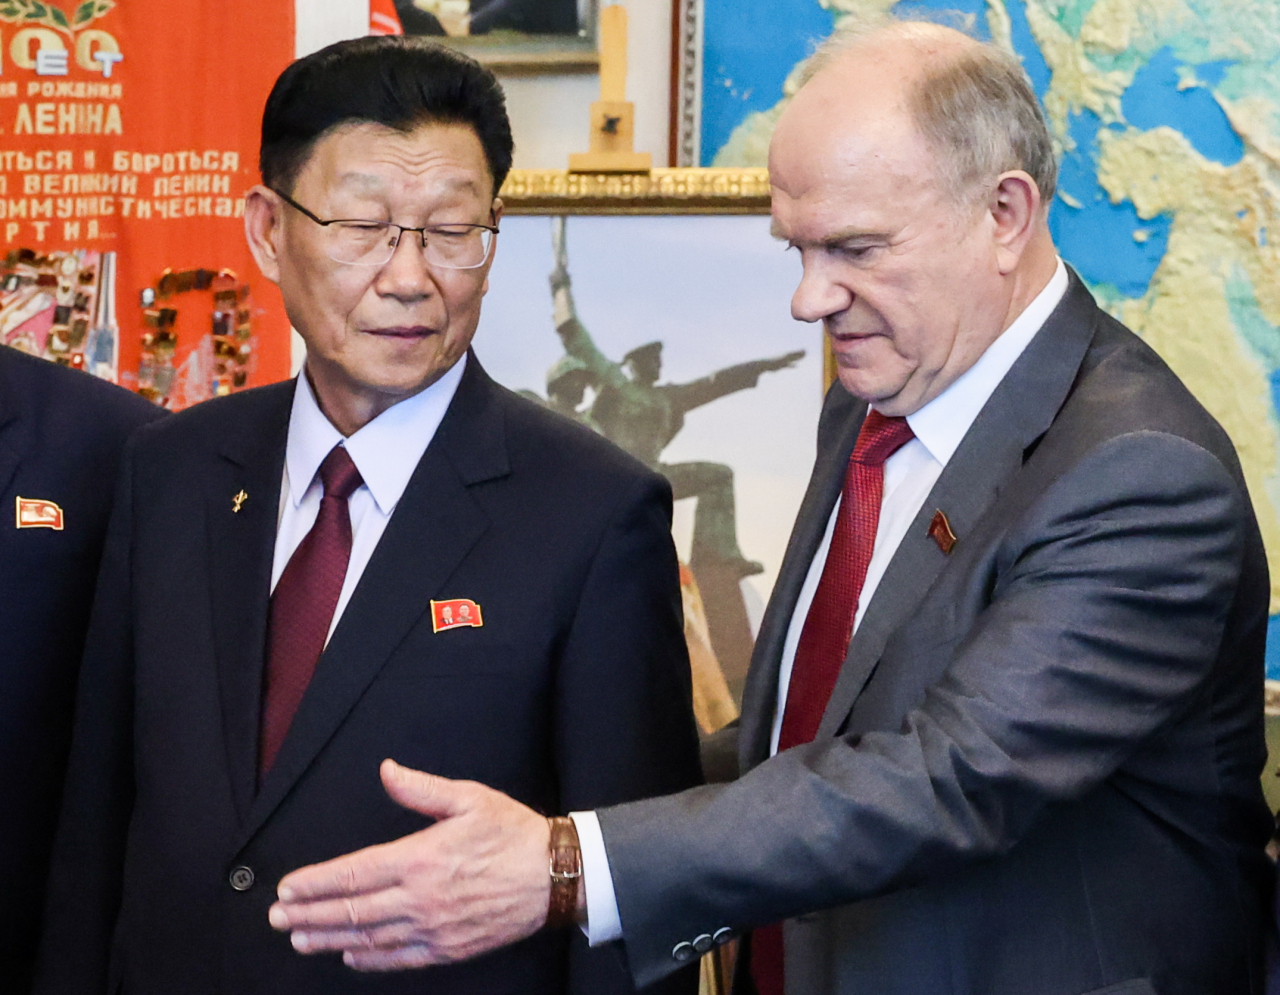 Kim Su-gil (left), an alternate member of the political bureau of the Workers' Party of North Korea, shakes hands with Gennady Zyuganov, leader of the Communist Party of the Russian Federation, during their meeting at the Russian State Duma on Tuesday. (Yonhap)